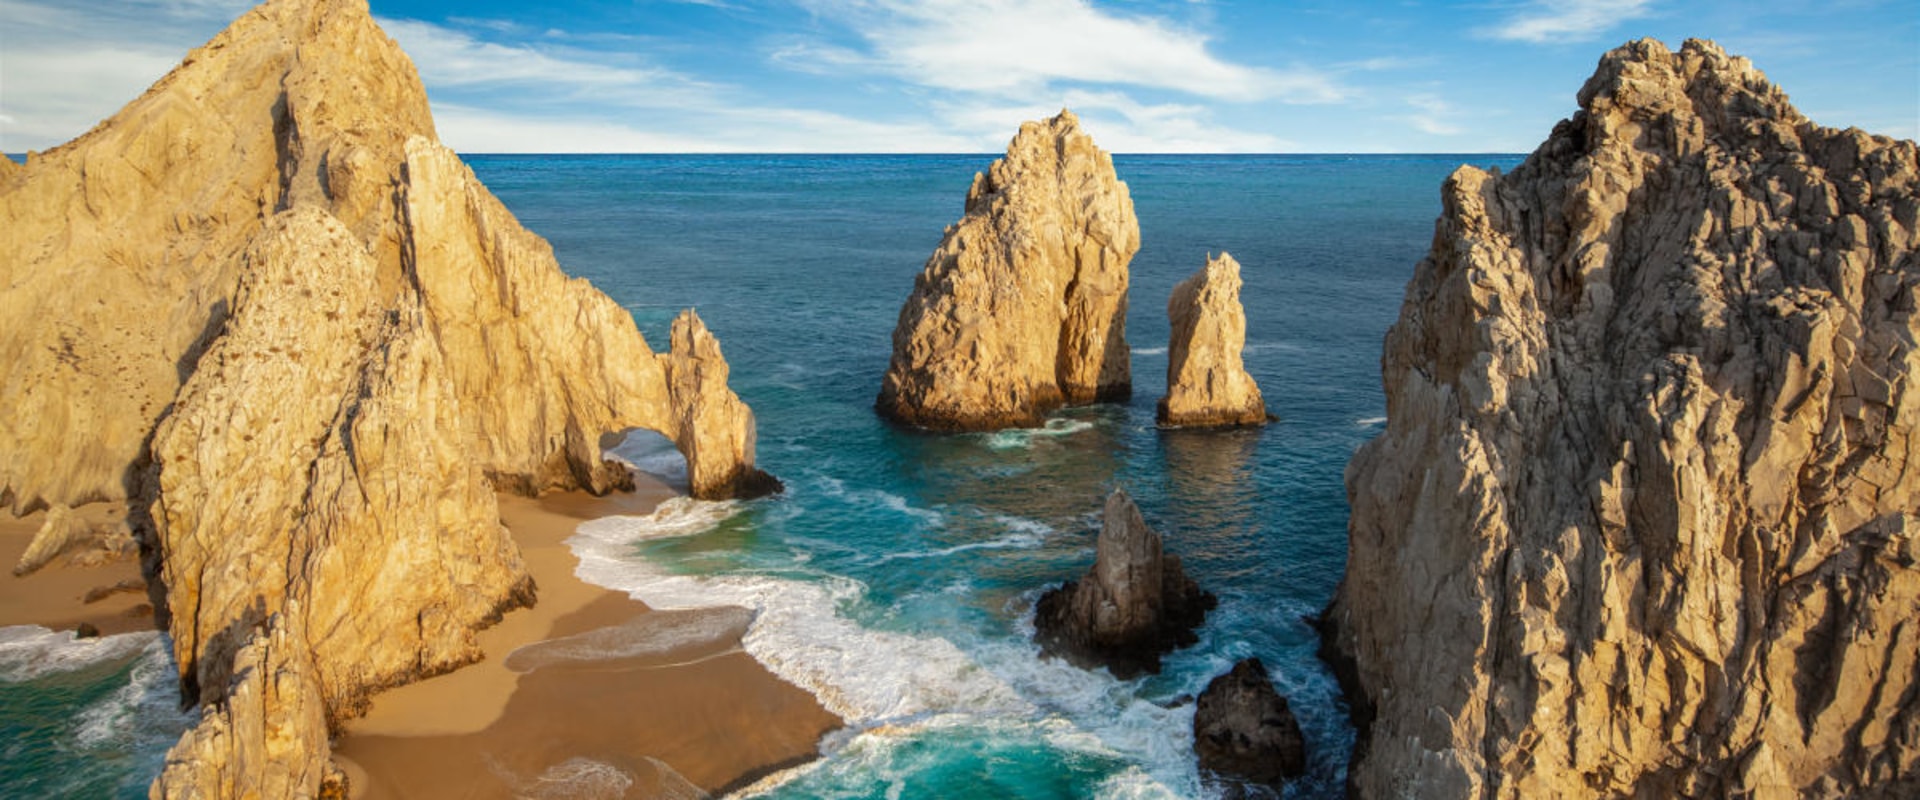 Everything You Need to Know About Covid-19 Testing in Cabo San Lucas